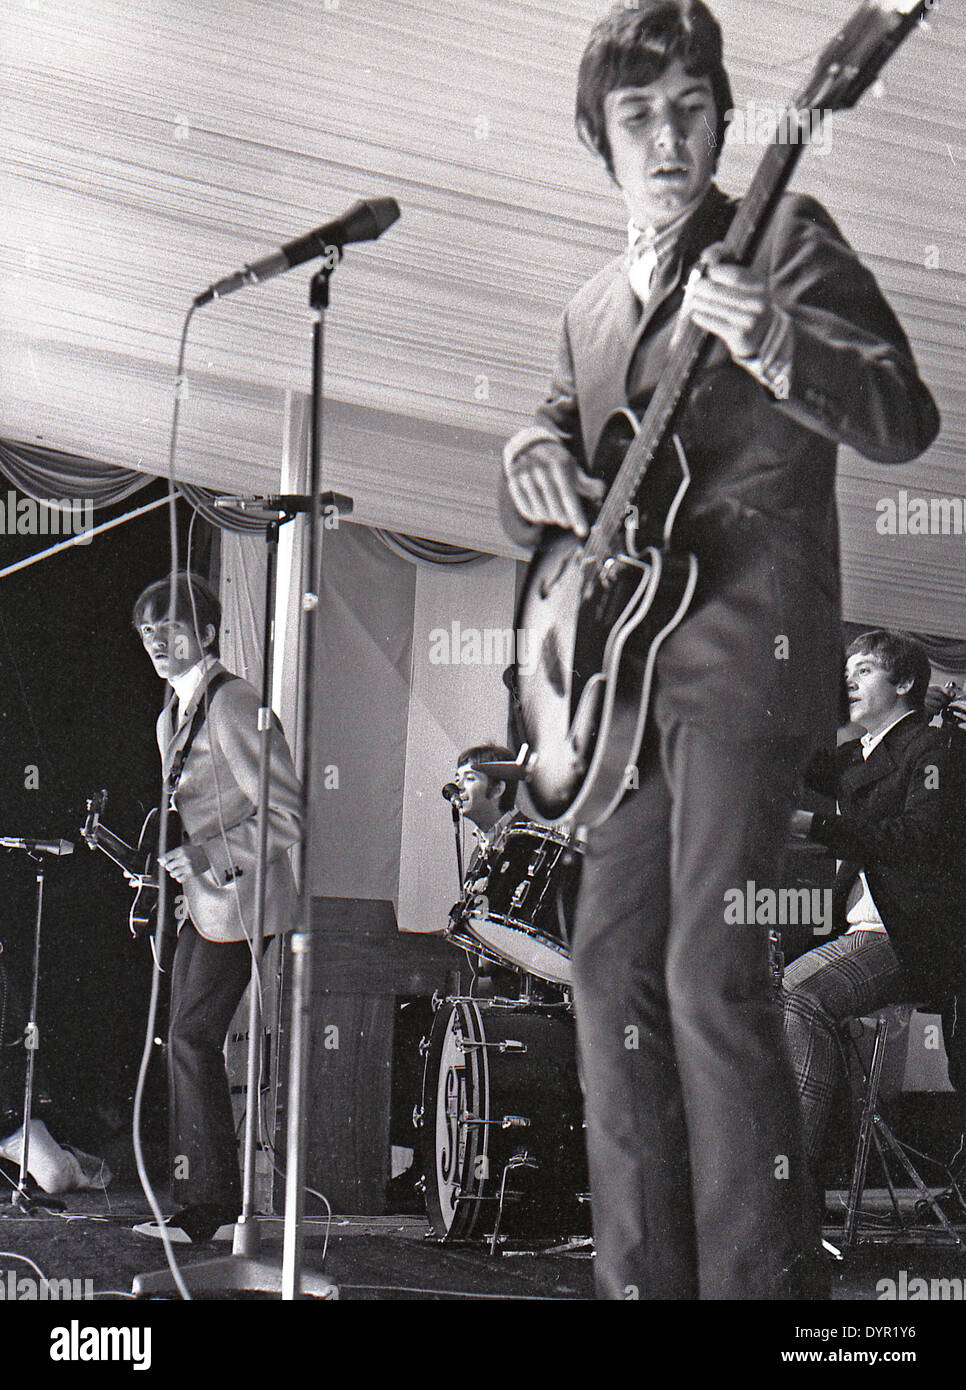 SMALL FACES pop group at Windsor Jazz & Blues Festival, England, 11 August  1967. From left: Marriott, McLagan, Lane, Jones Stock Photo - Alamy